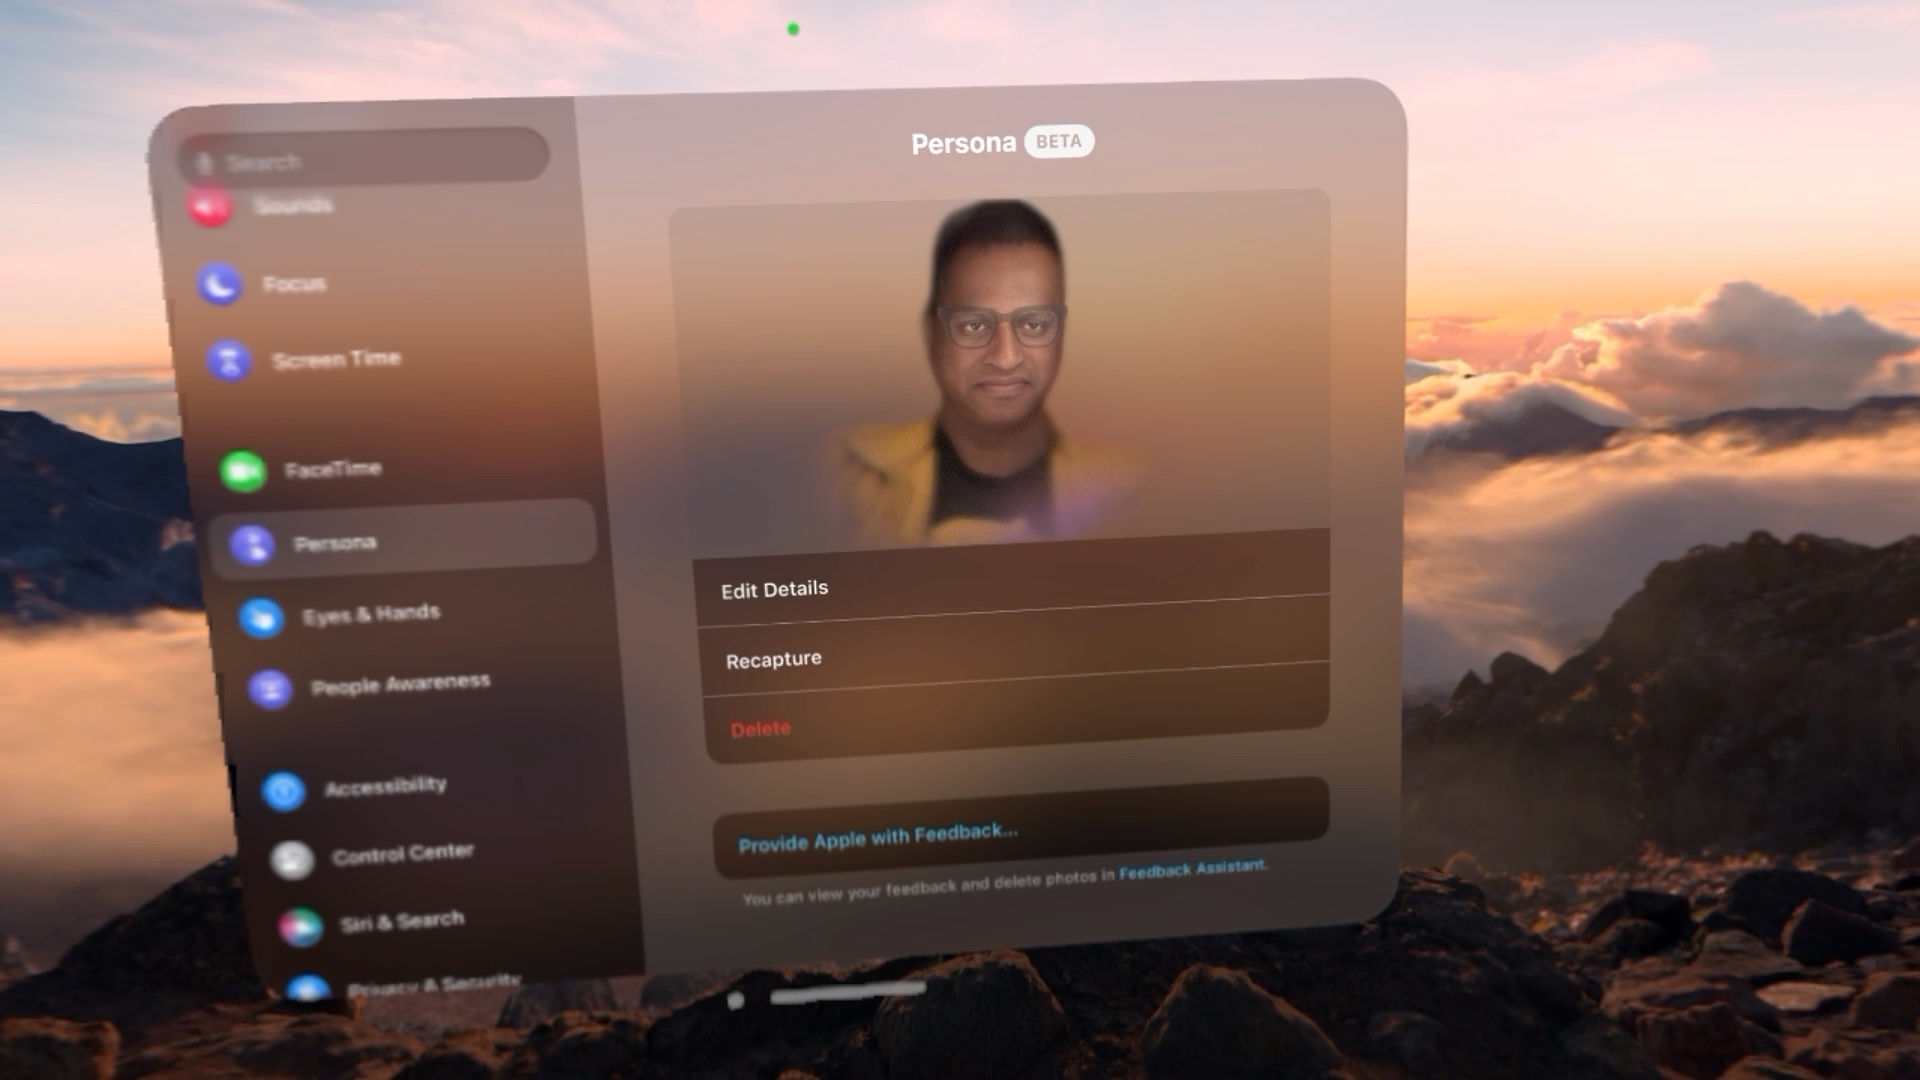 Even though it's only been out for a few months, Apple has already made major improvements to Vision Pro features like its personas. 